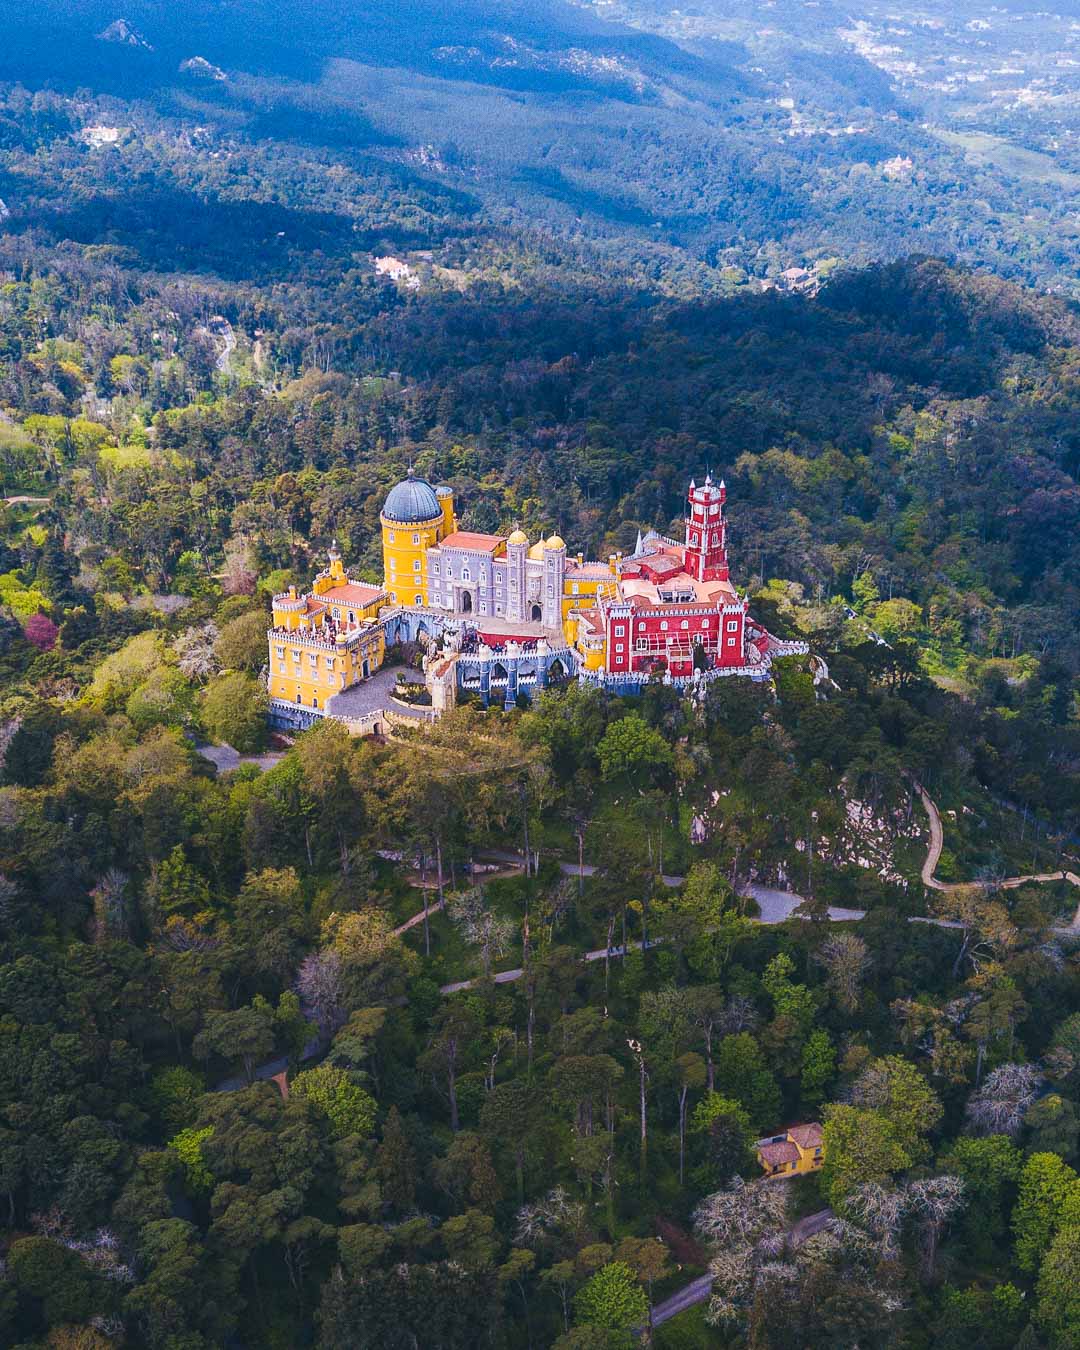 pena palace from the air